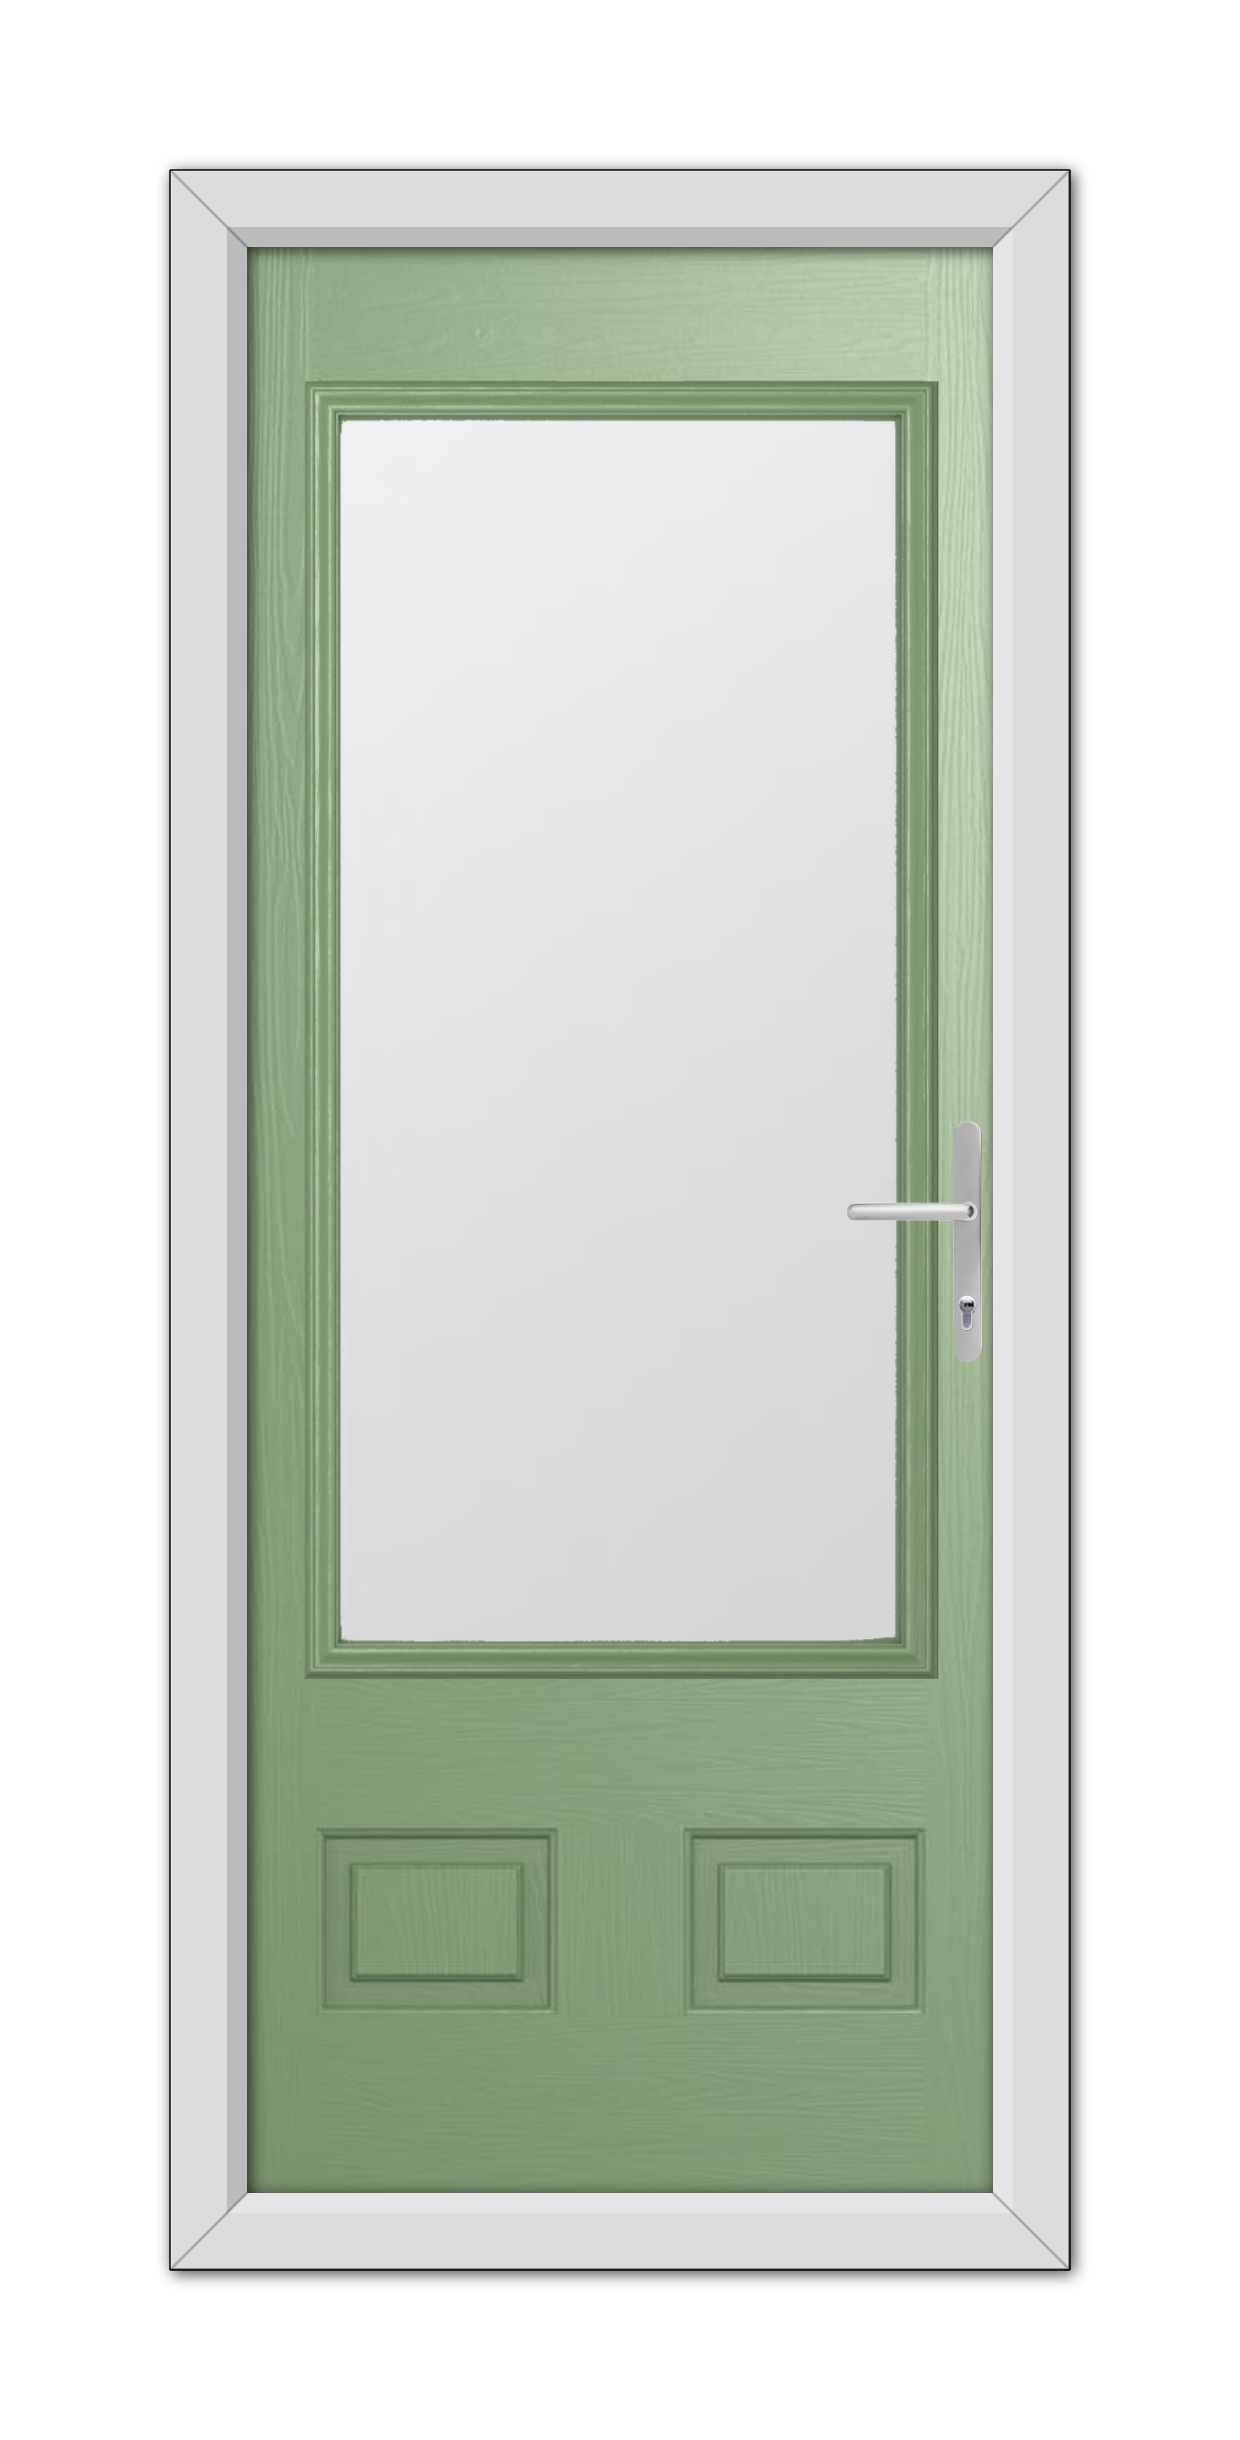 A Chartwell Green Walcot Composite Door 48mm Timber Core with a rectangular glass panel at the top, three vertical panels at the bottom, and a metallic handle on the right, set in a white frame.